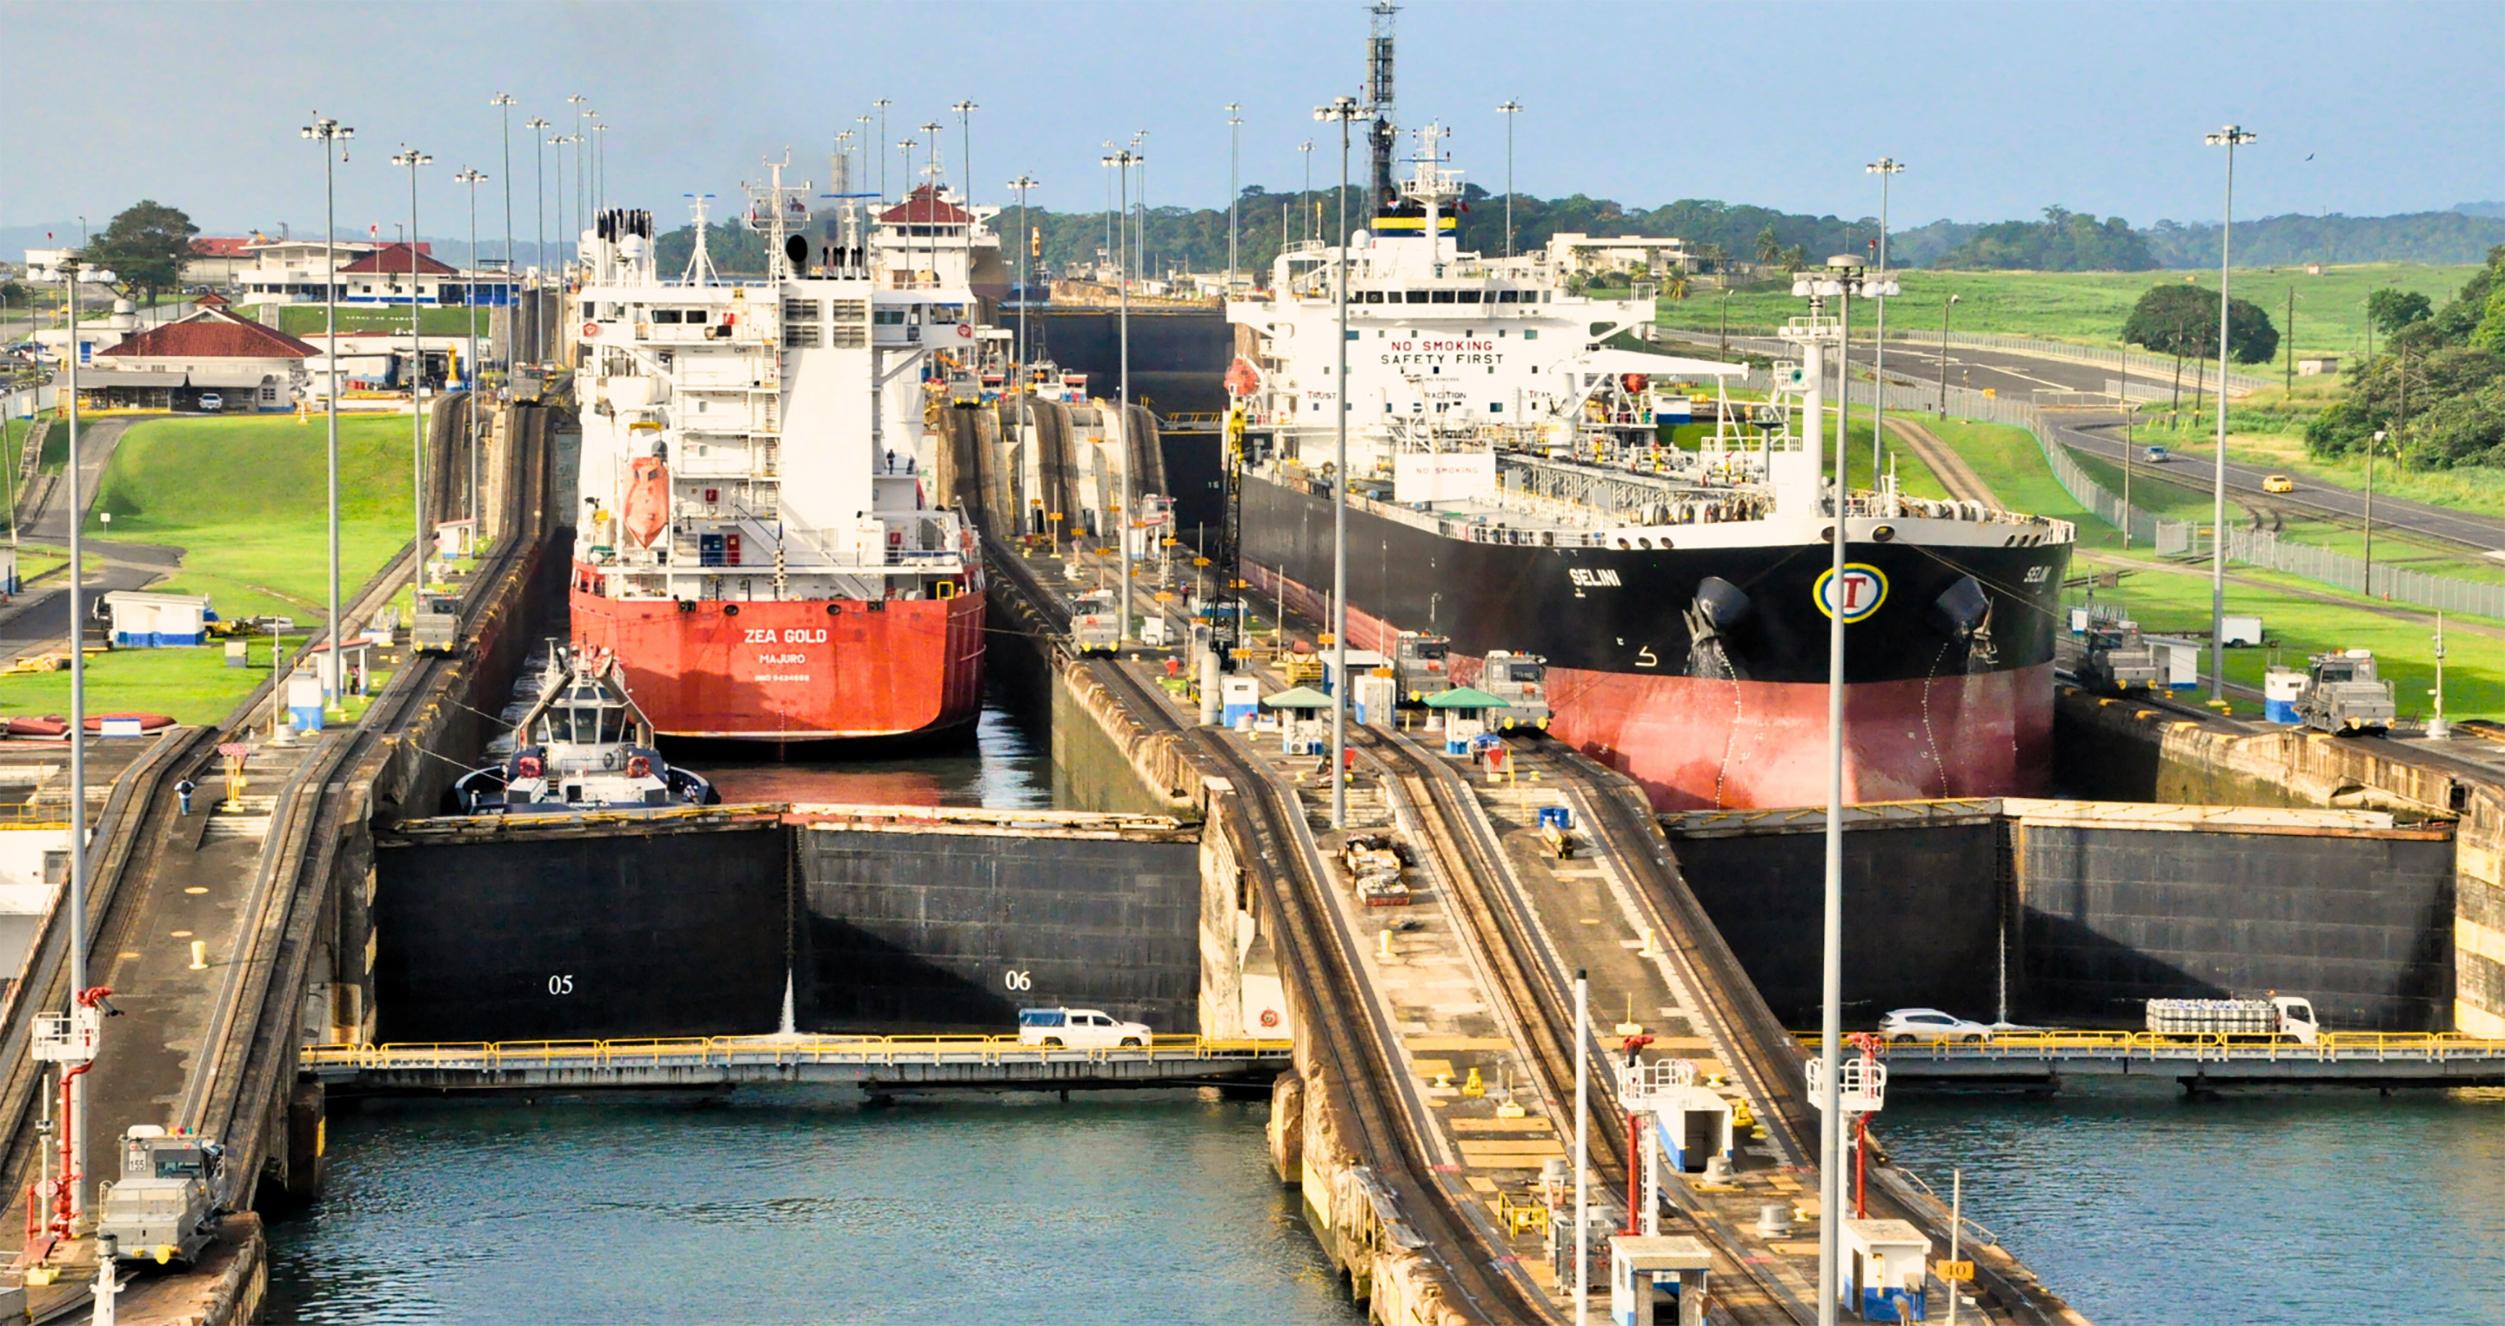 SAW Panama Program Image - Image of the Panama Canal with two boats going through